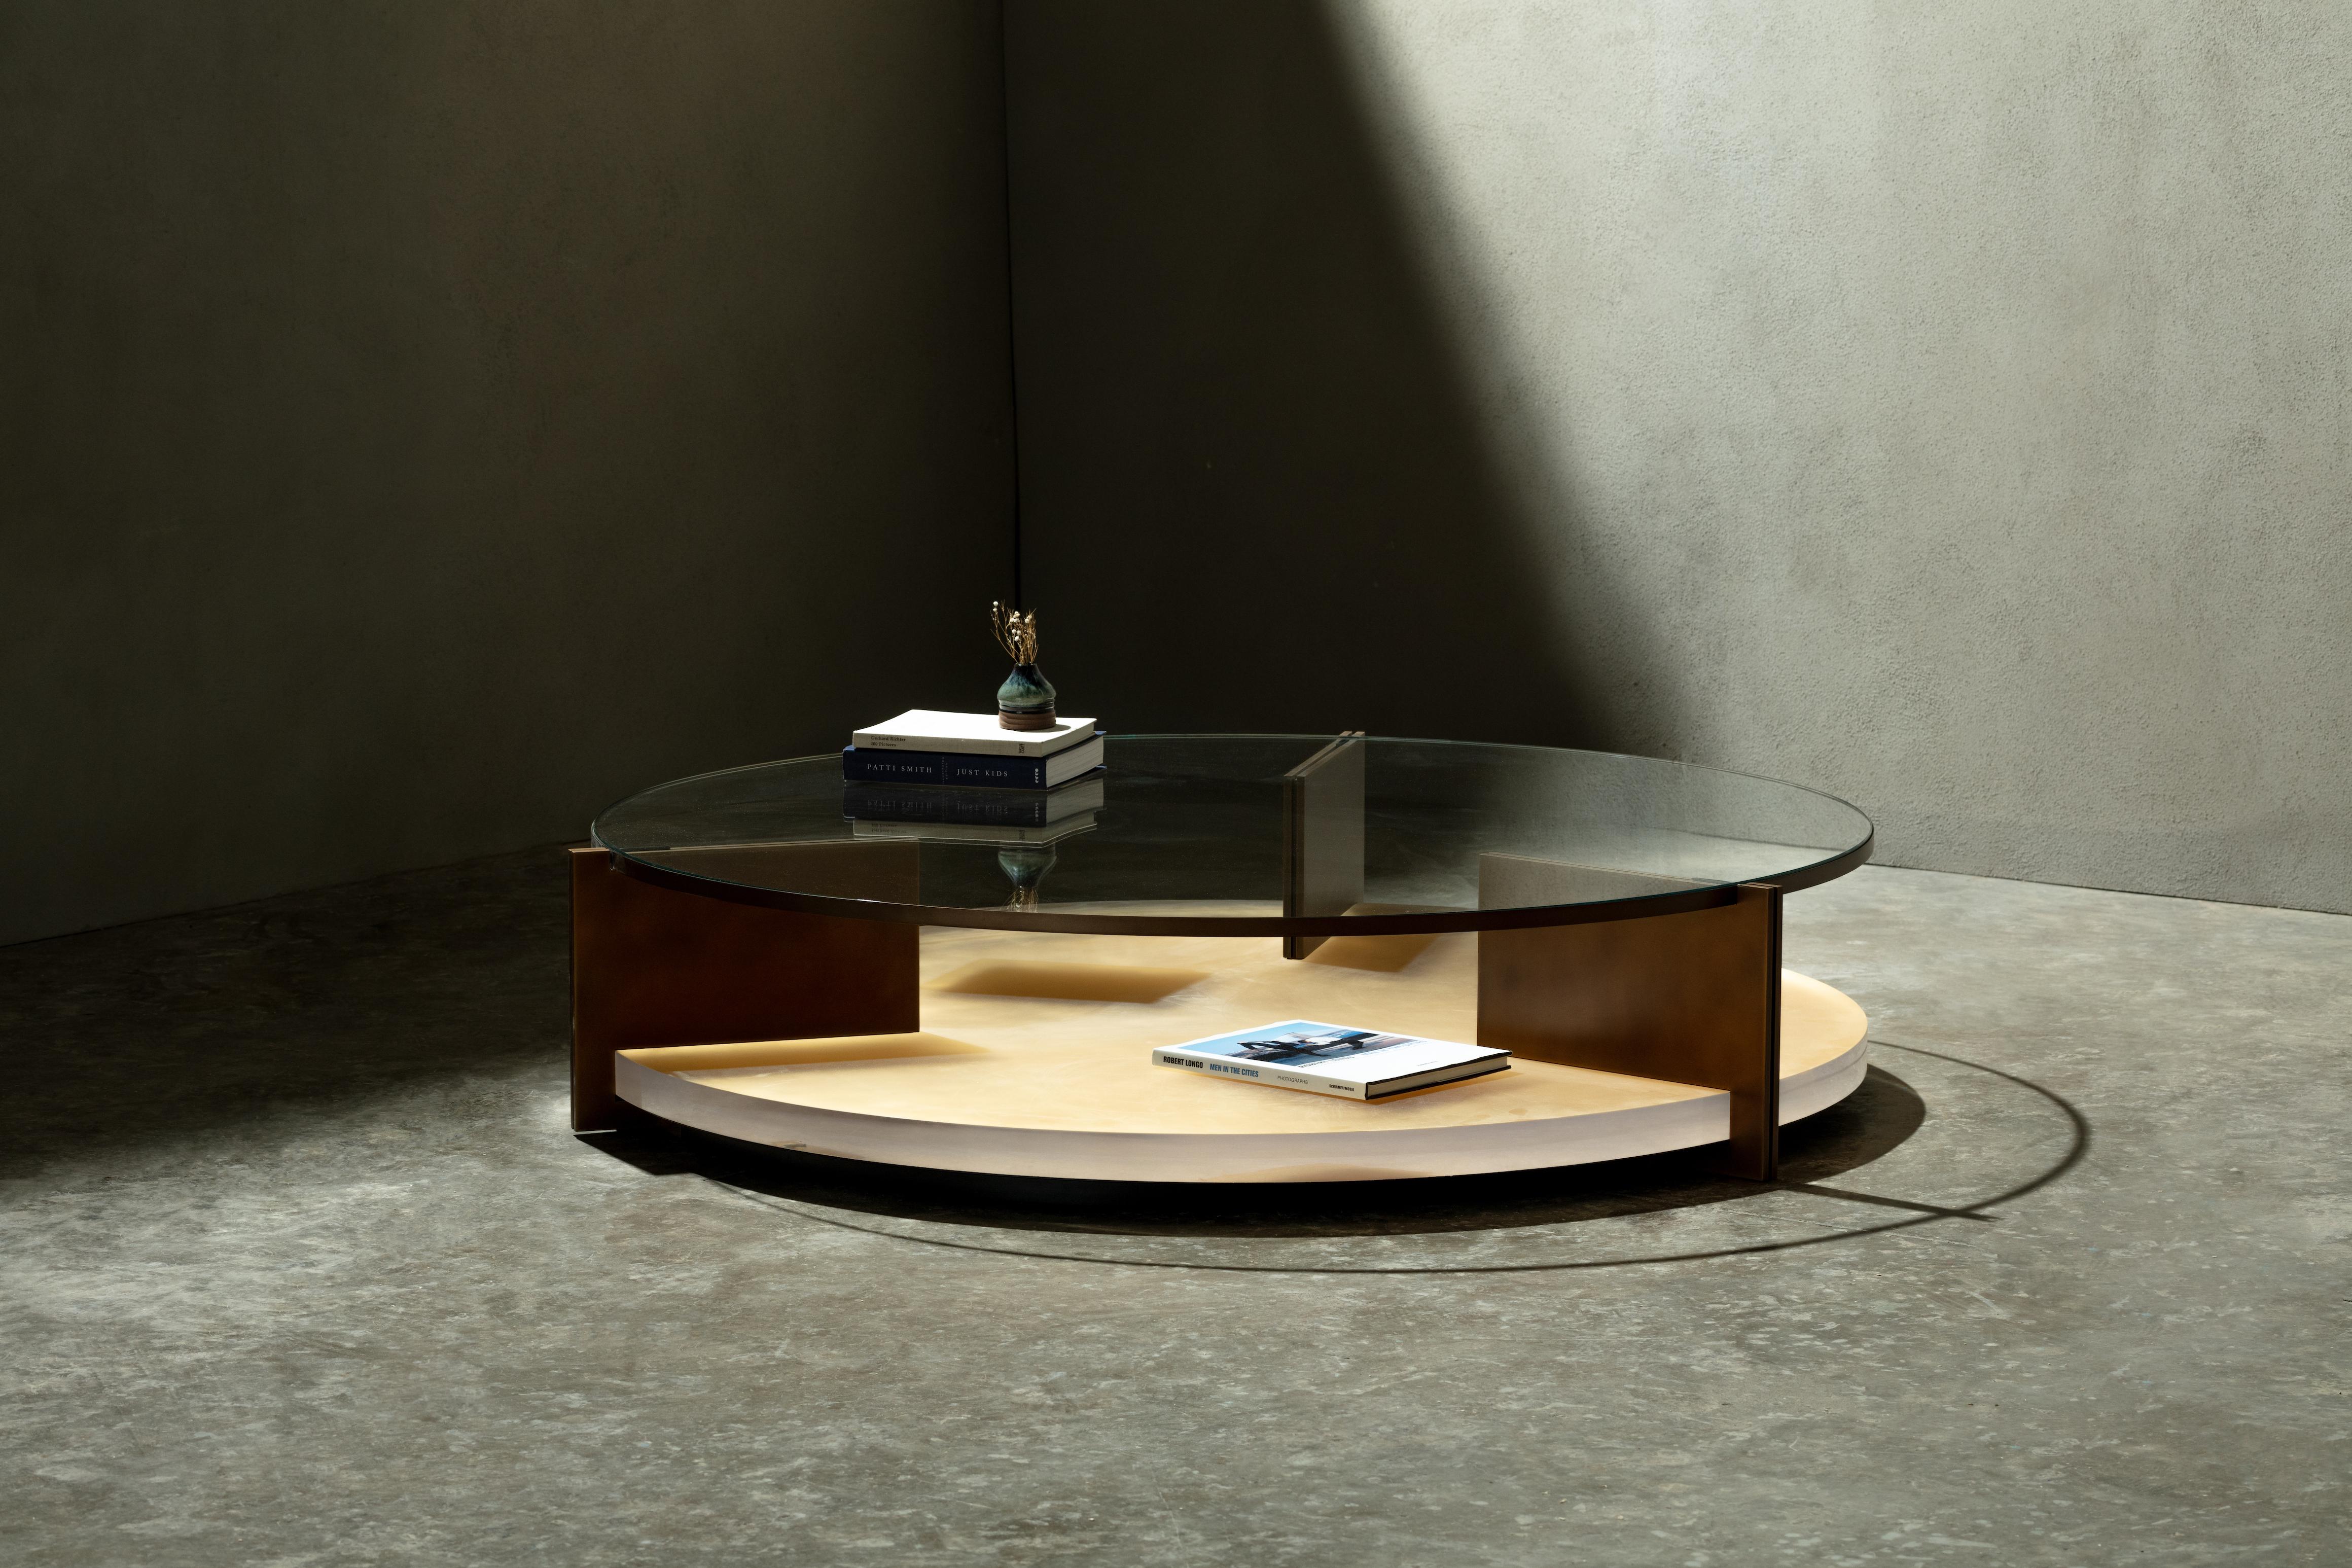 Inspired by the Umbra side table, the Clio coffee table boasts an extra clear glass top resting on a sandblasted acrylic base with silver or gold leaf backing and supported by three metal legs. The acrylic's thickness and sandblasted effect create